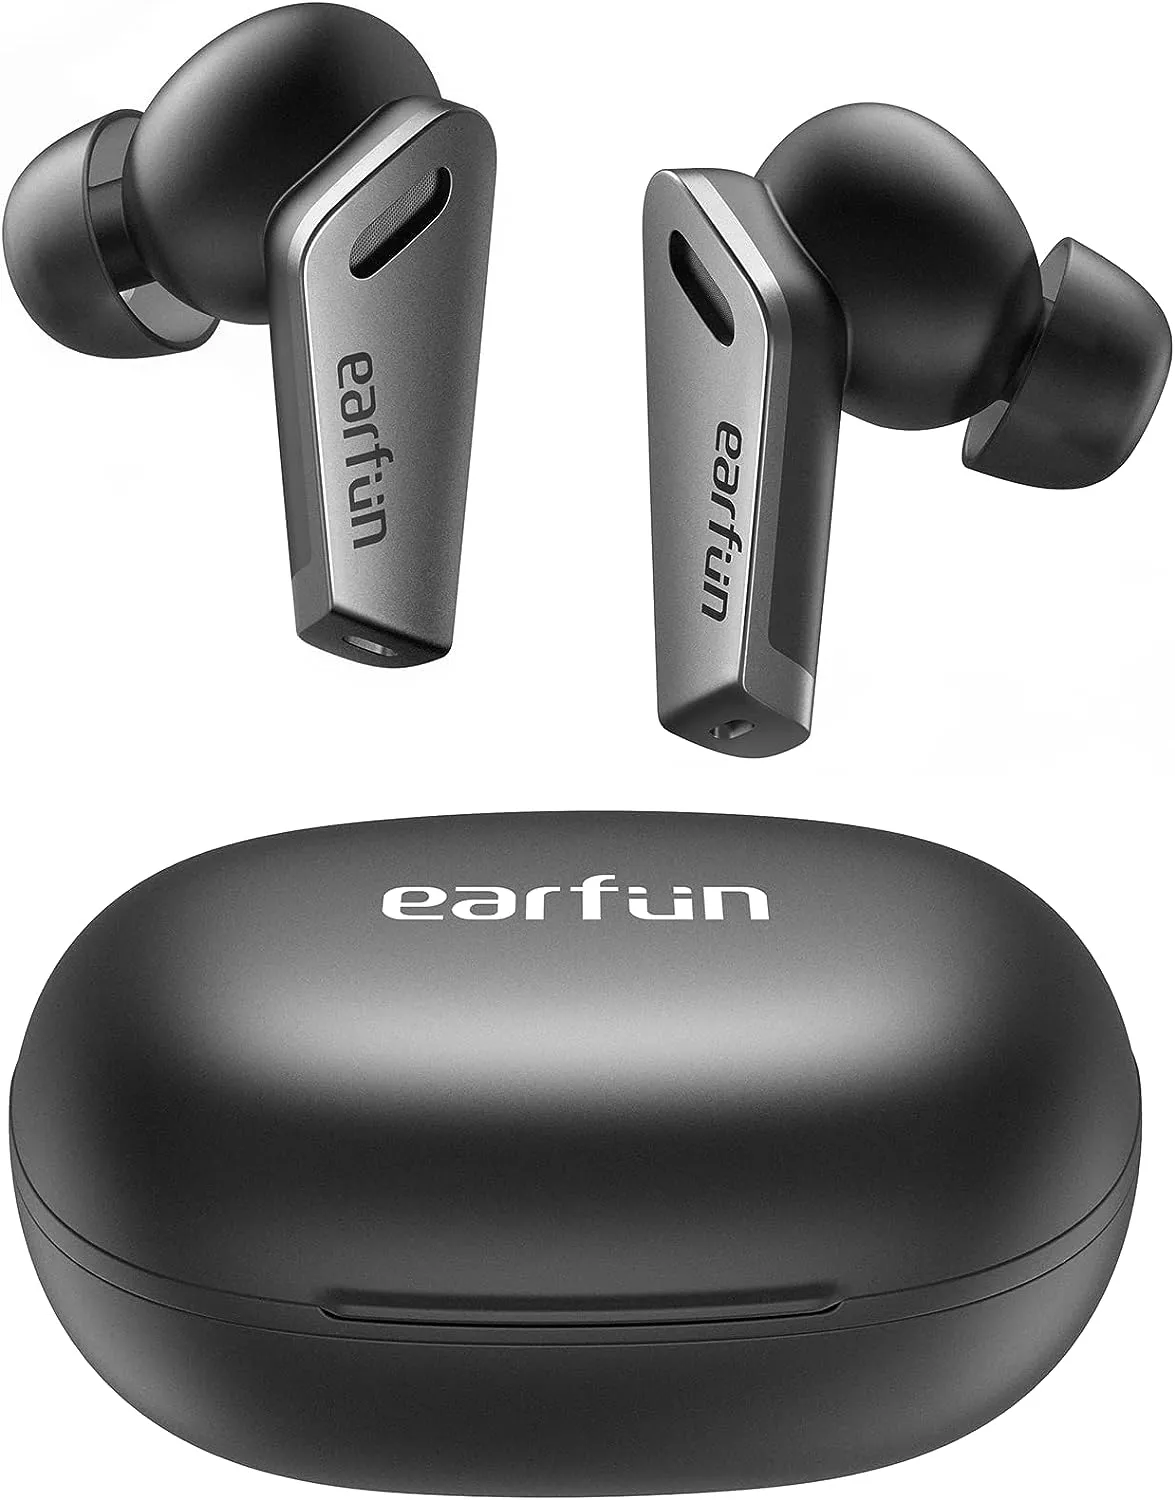 EarFun Active Noise Cancelling Wireless Earbuds